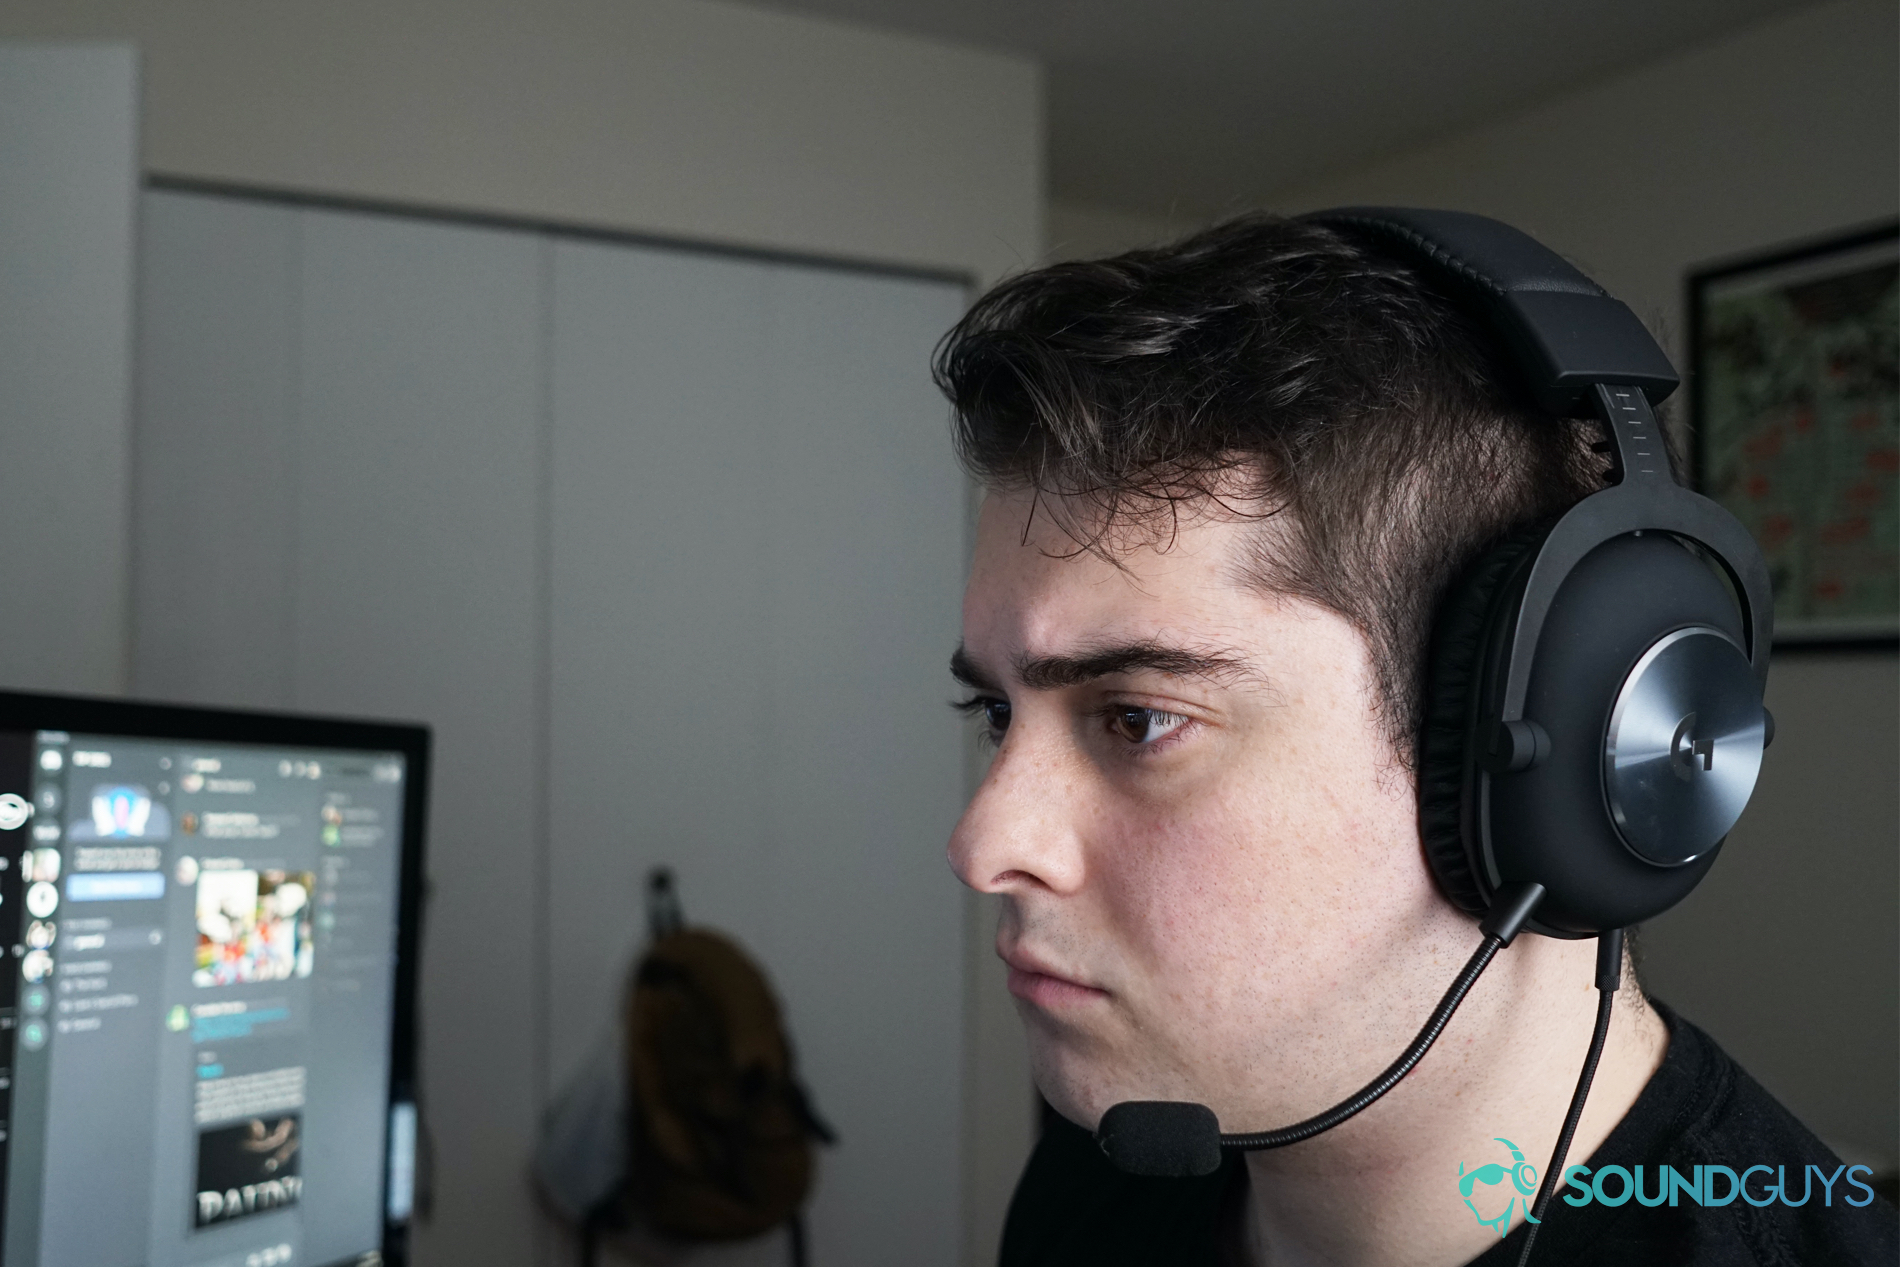 A man wears the Logitech G Pro X gaming headset sitting at a computer, with Discord running on a monitor behind him.